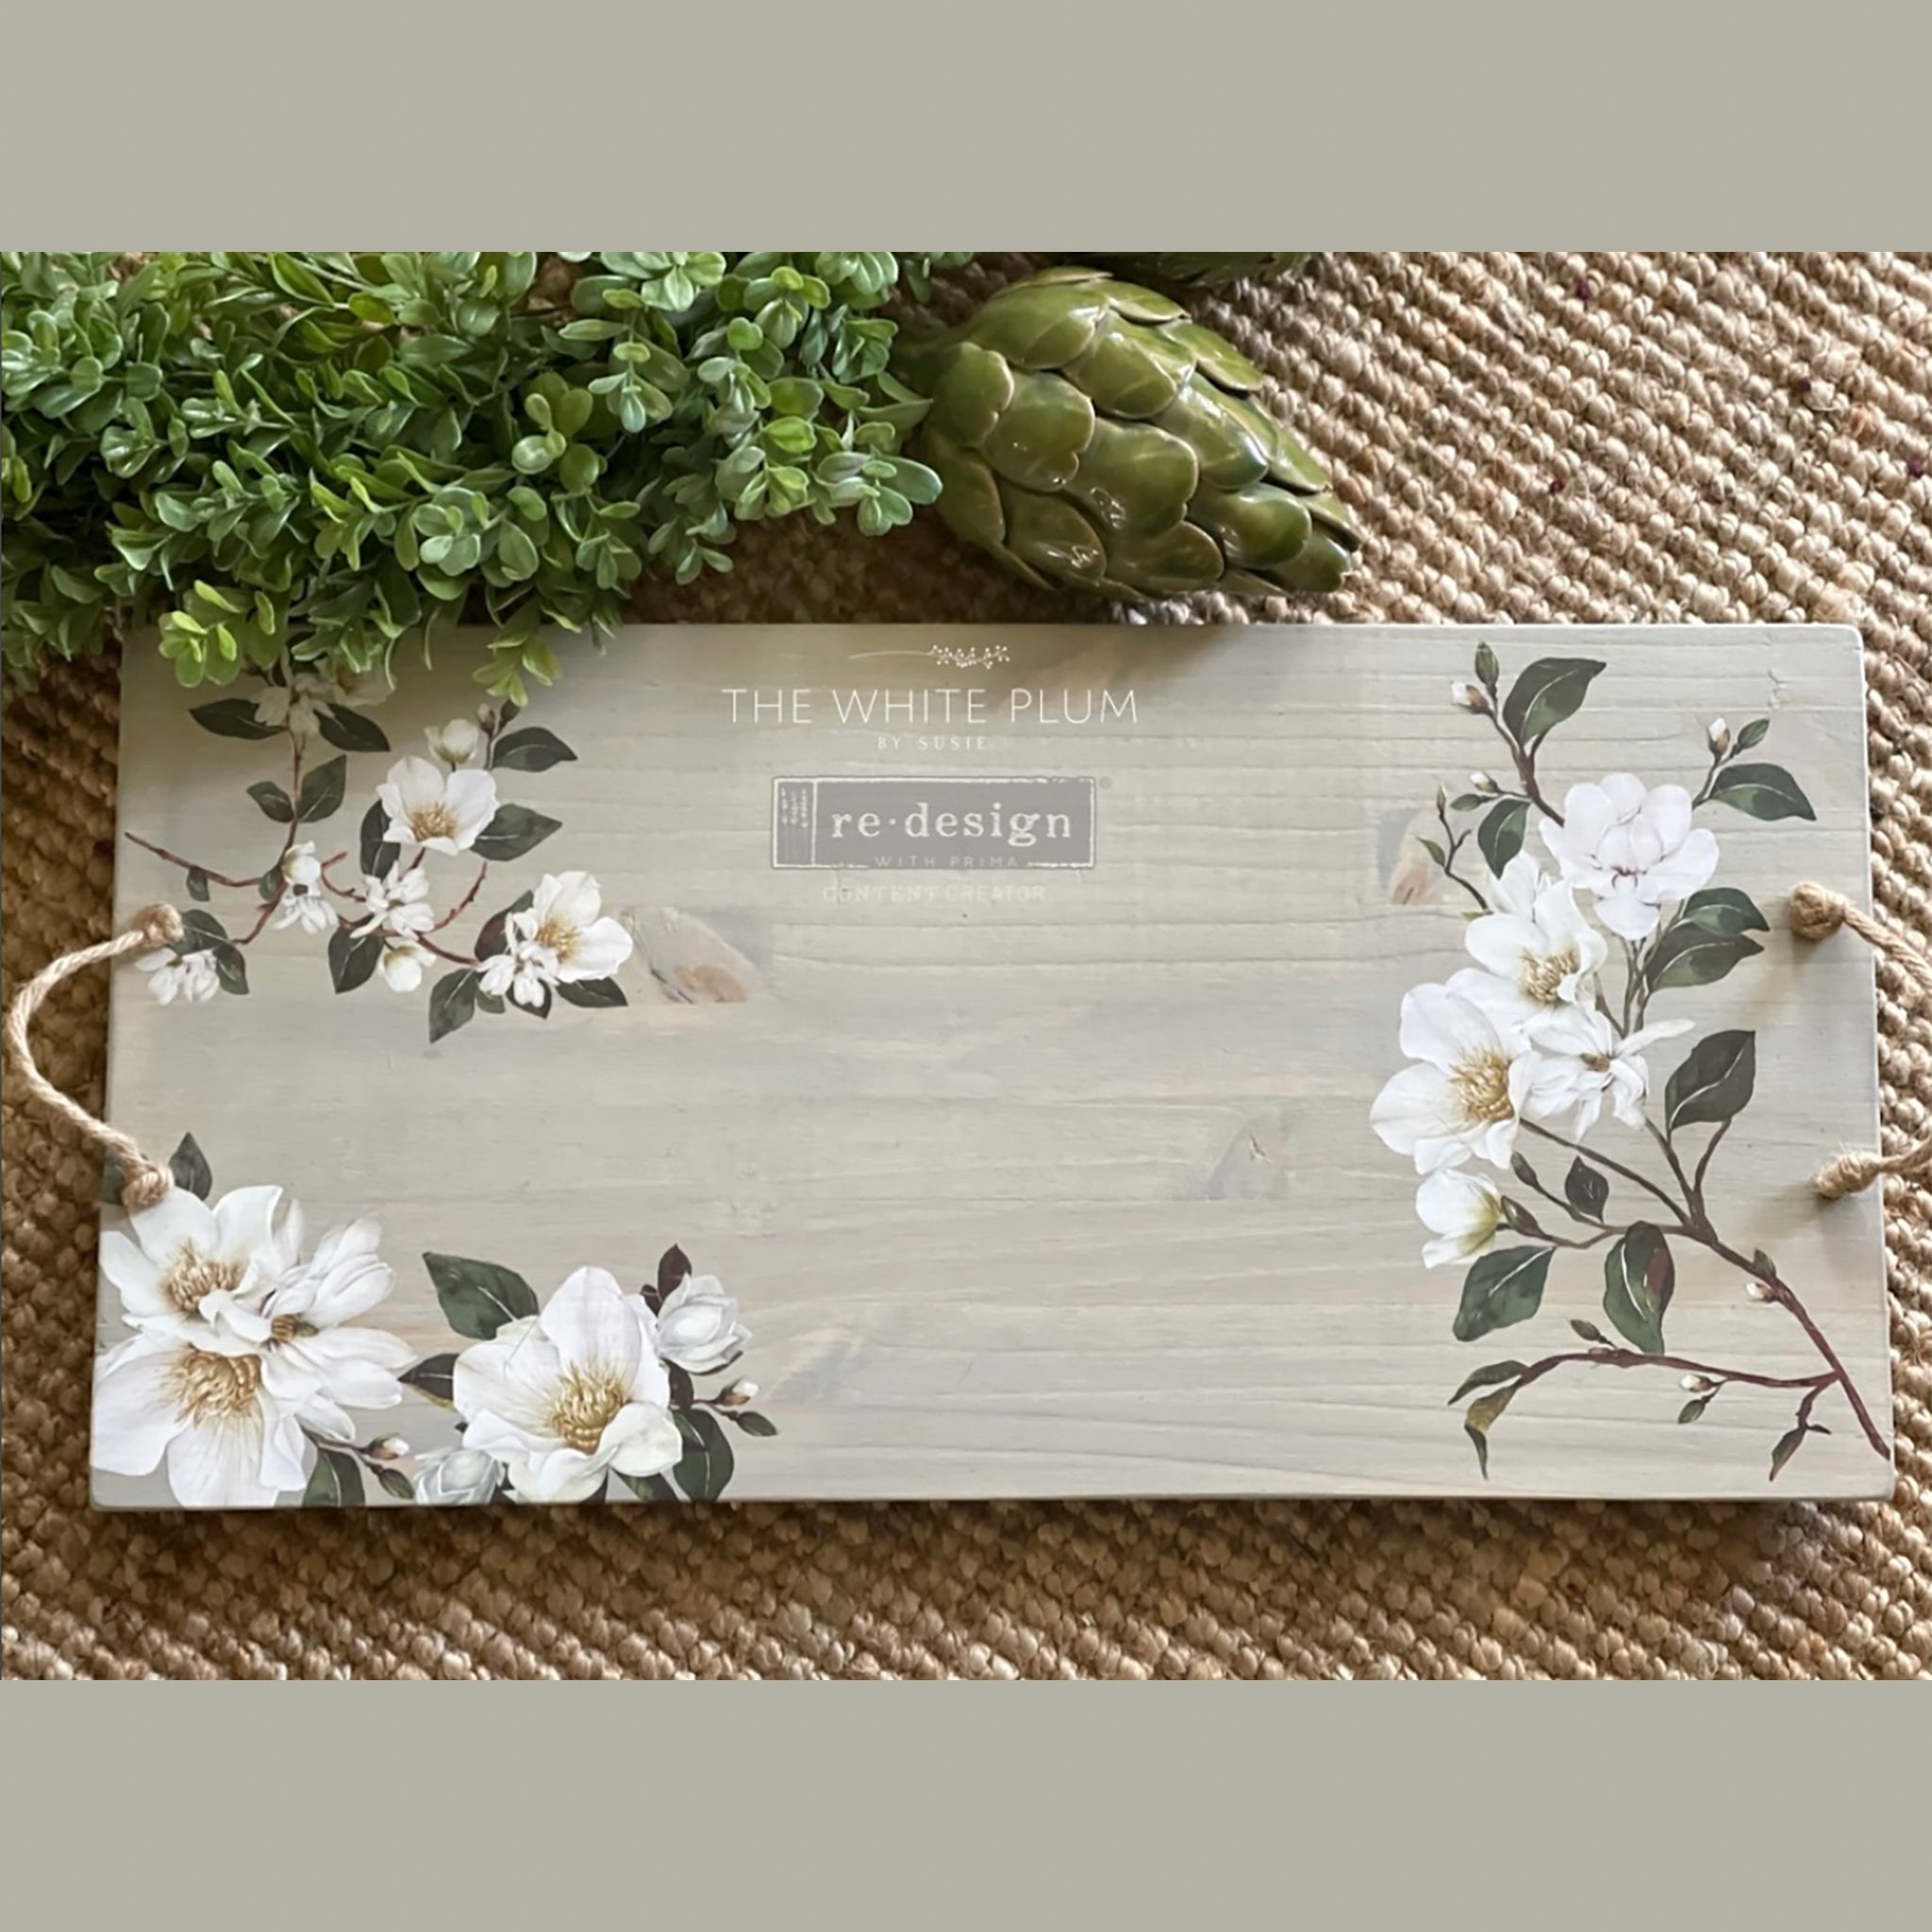 A wood serving tray with a rope handle is white-washed and features ReDesign with Prima's White Magnolia small transfer on it.